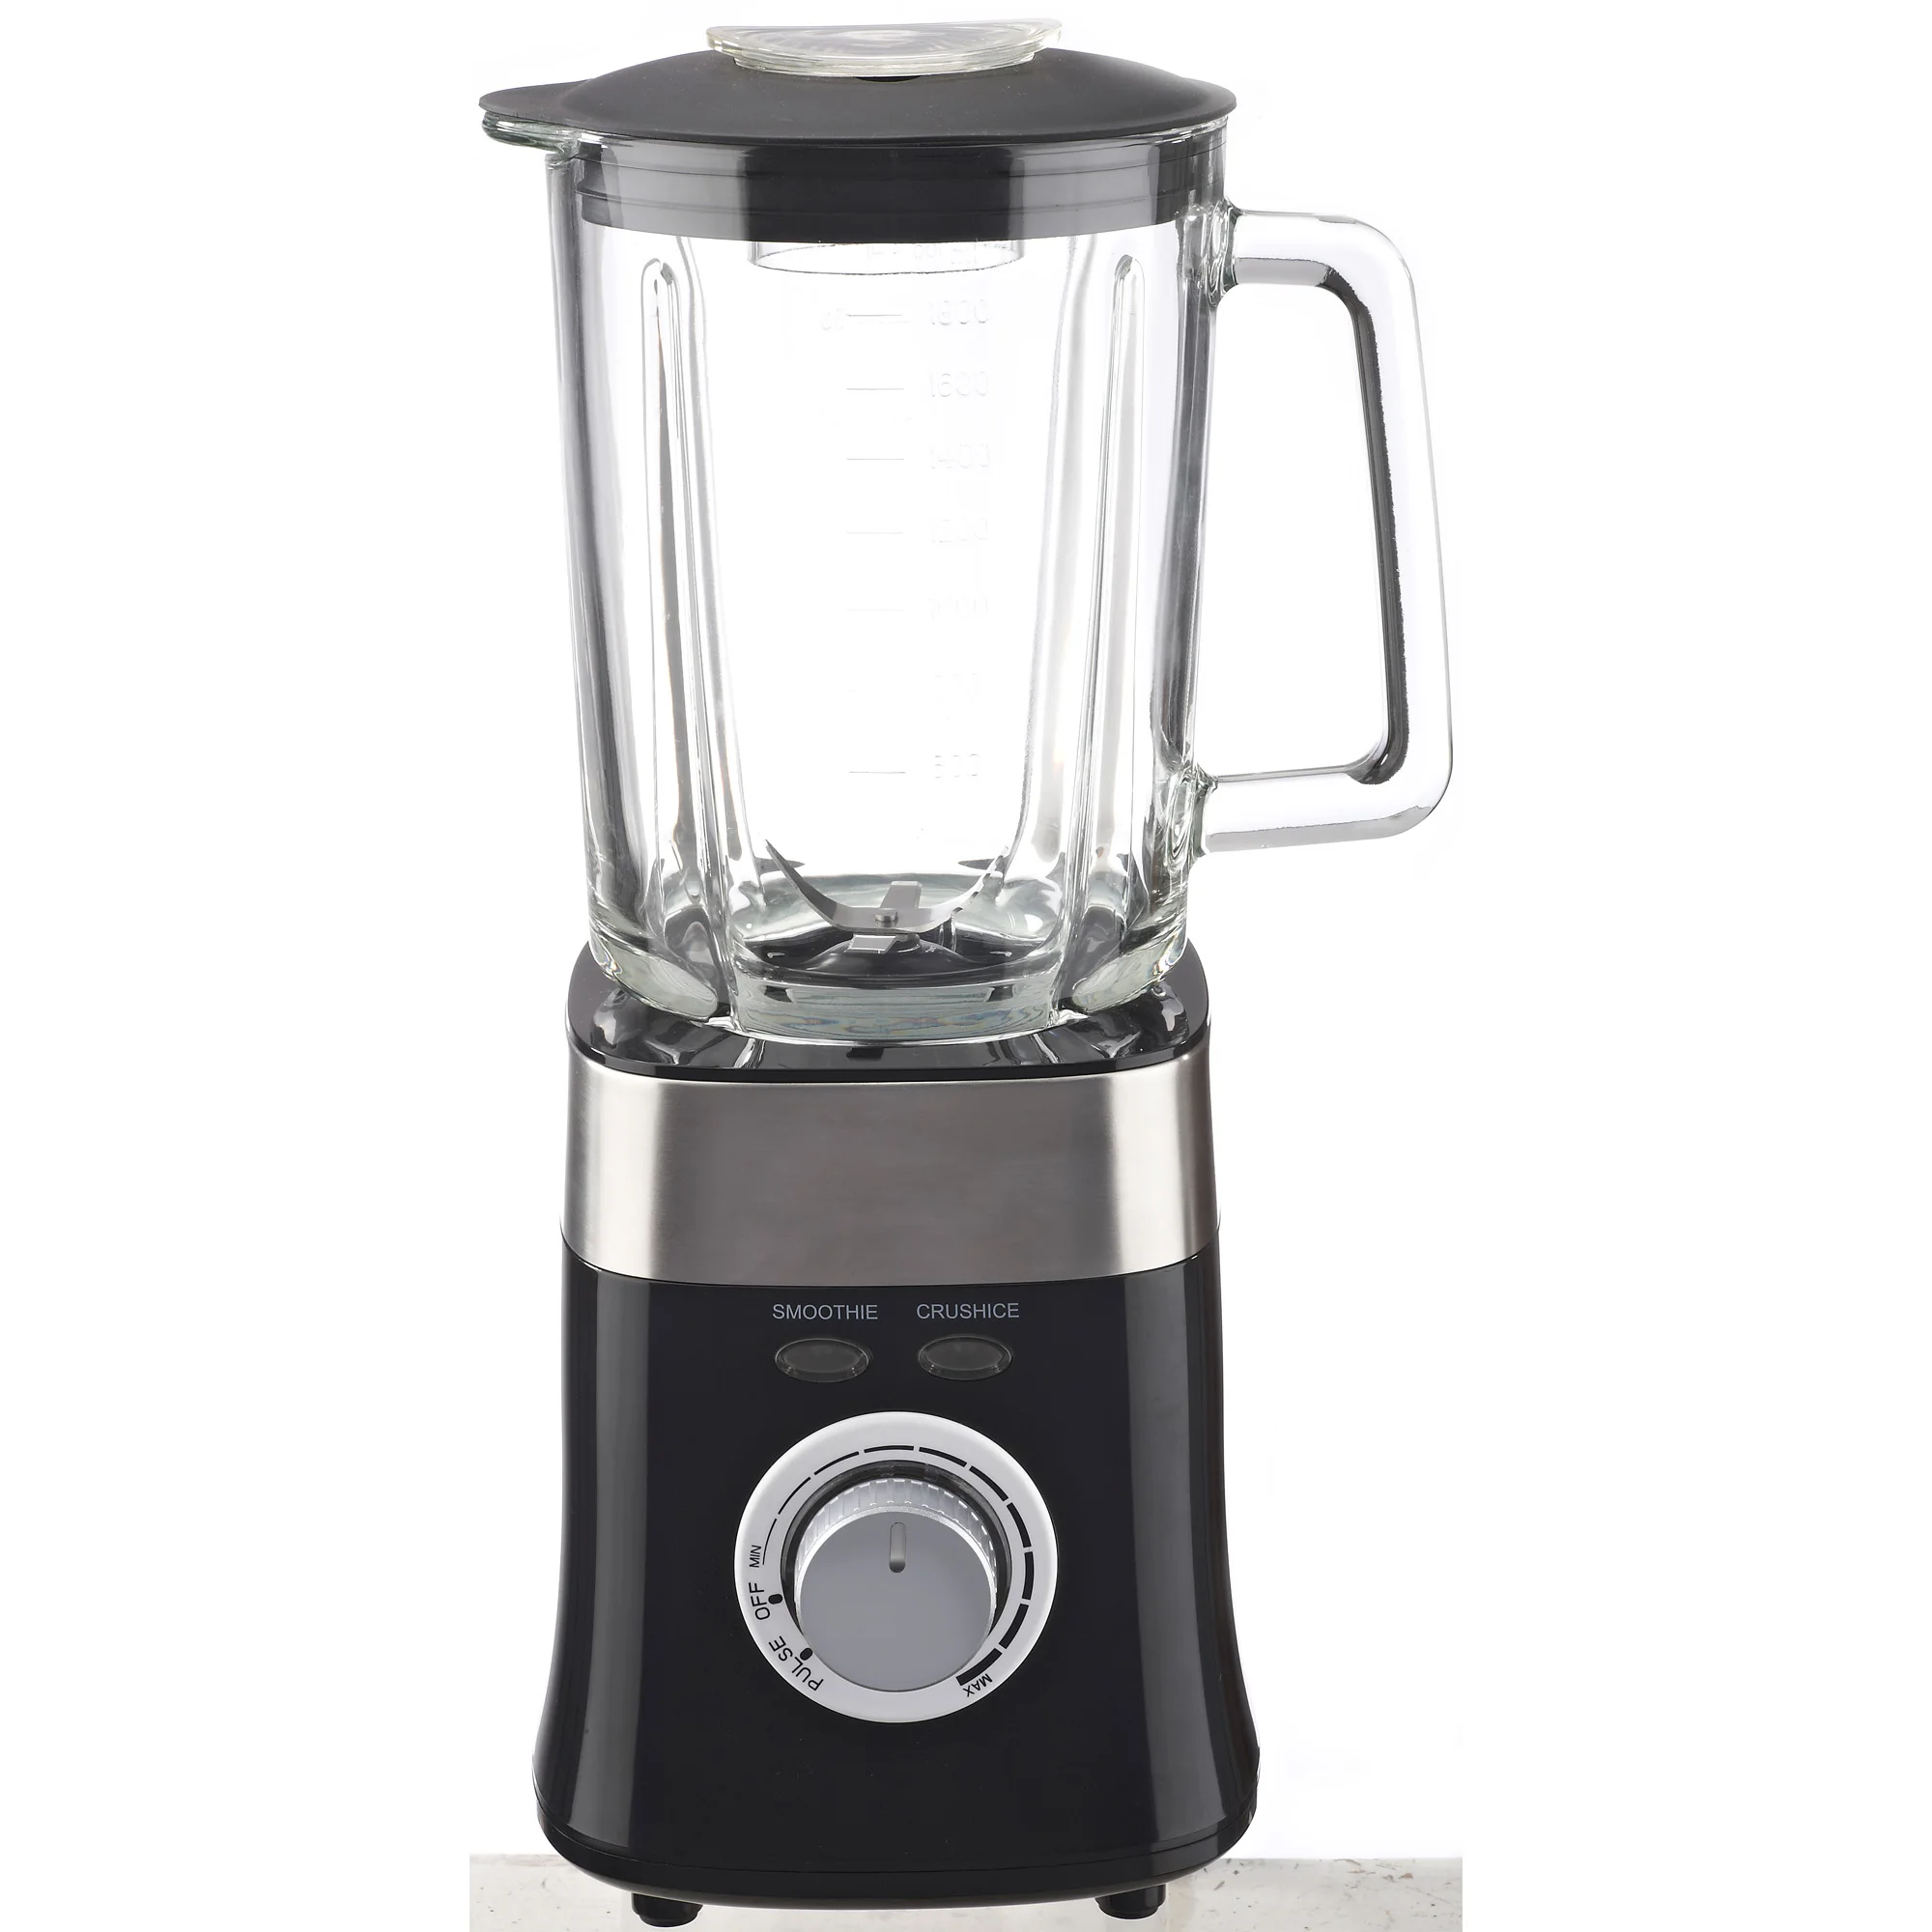 Multifunctional Stand Blender With Juice Blending Smoothie Ice Crush  Lb6102a 800w Blender Mixer - Buy Electric Blender,Stand Blender,Blender  Product on 